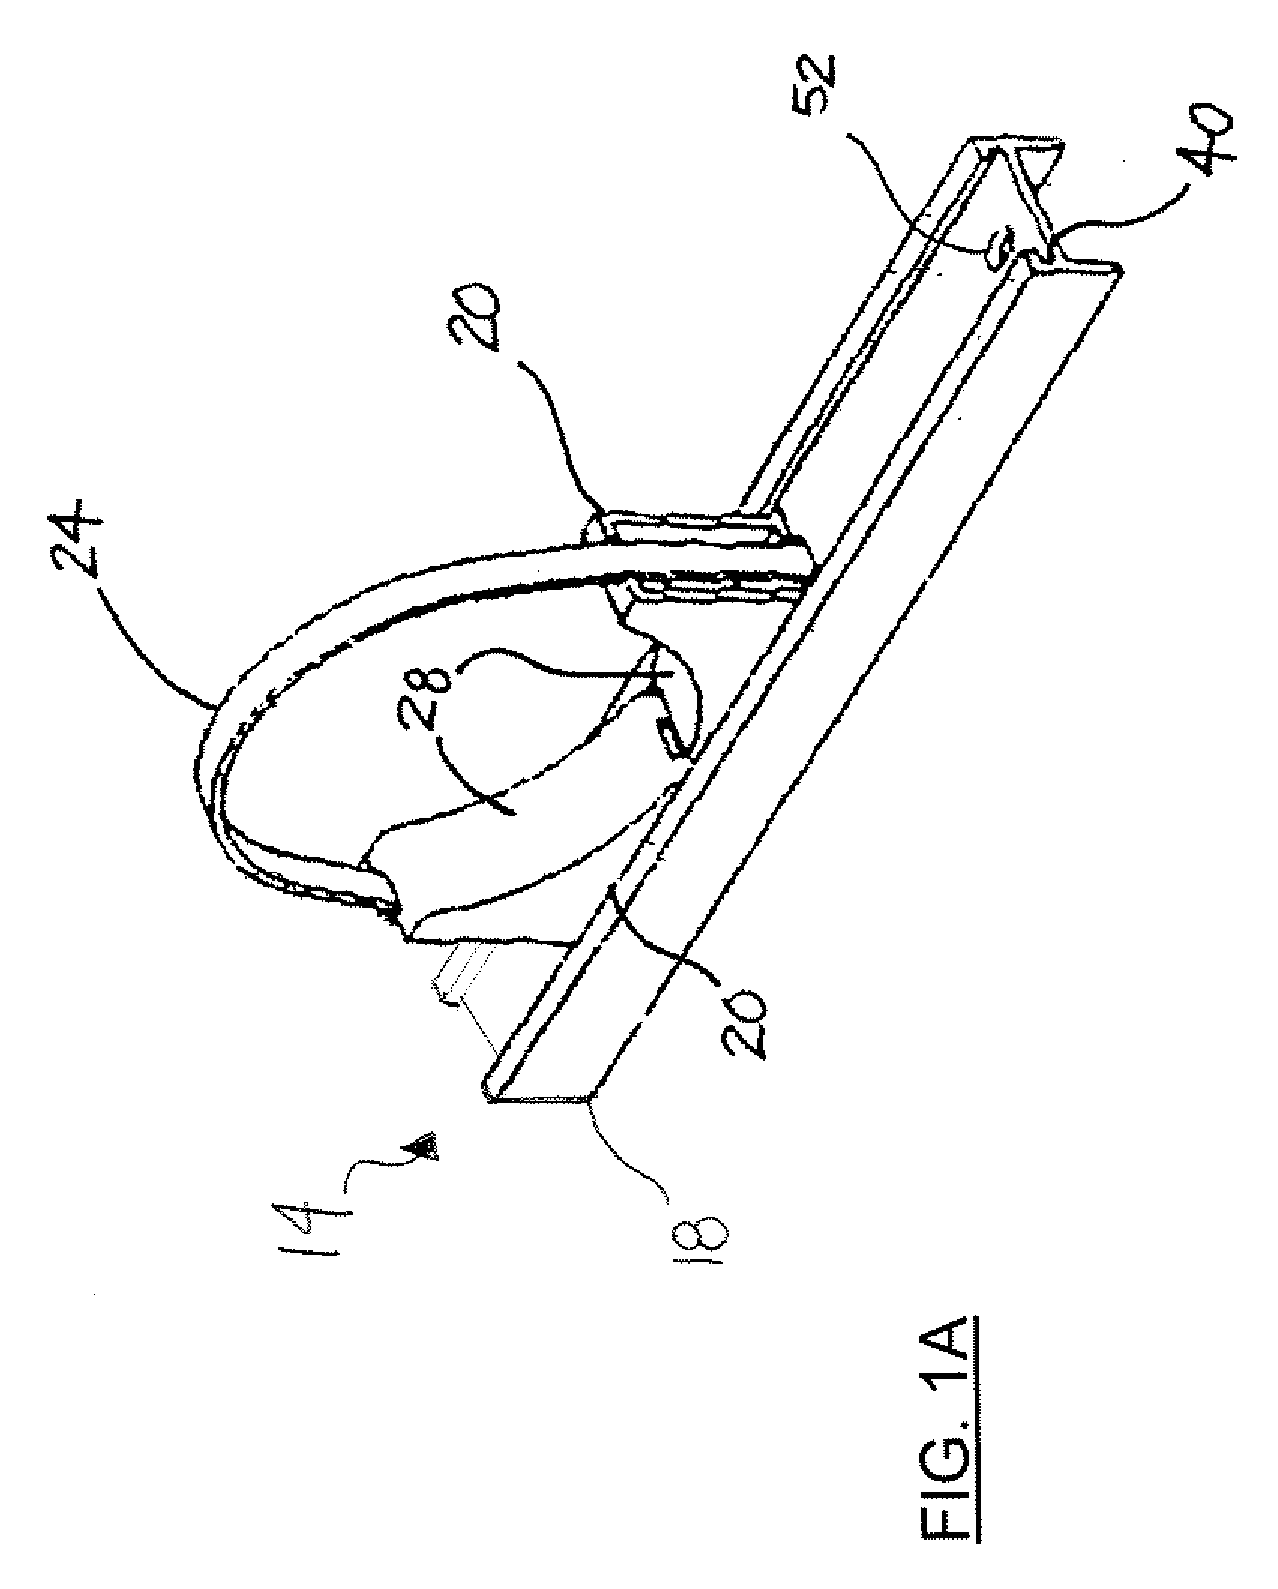 Variable-duct support assembly